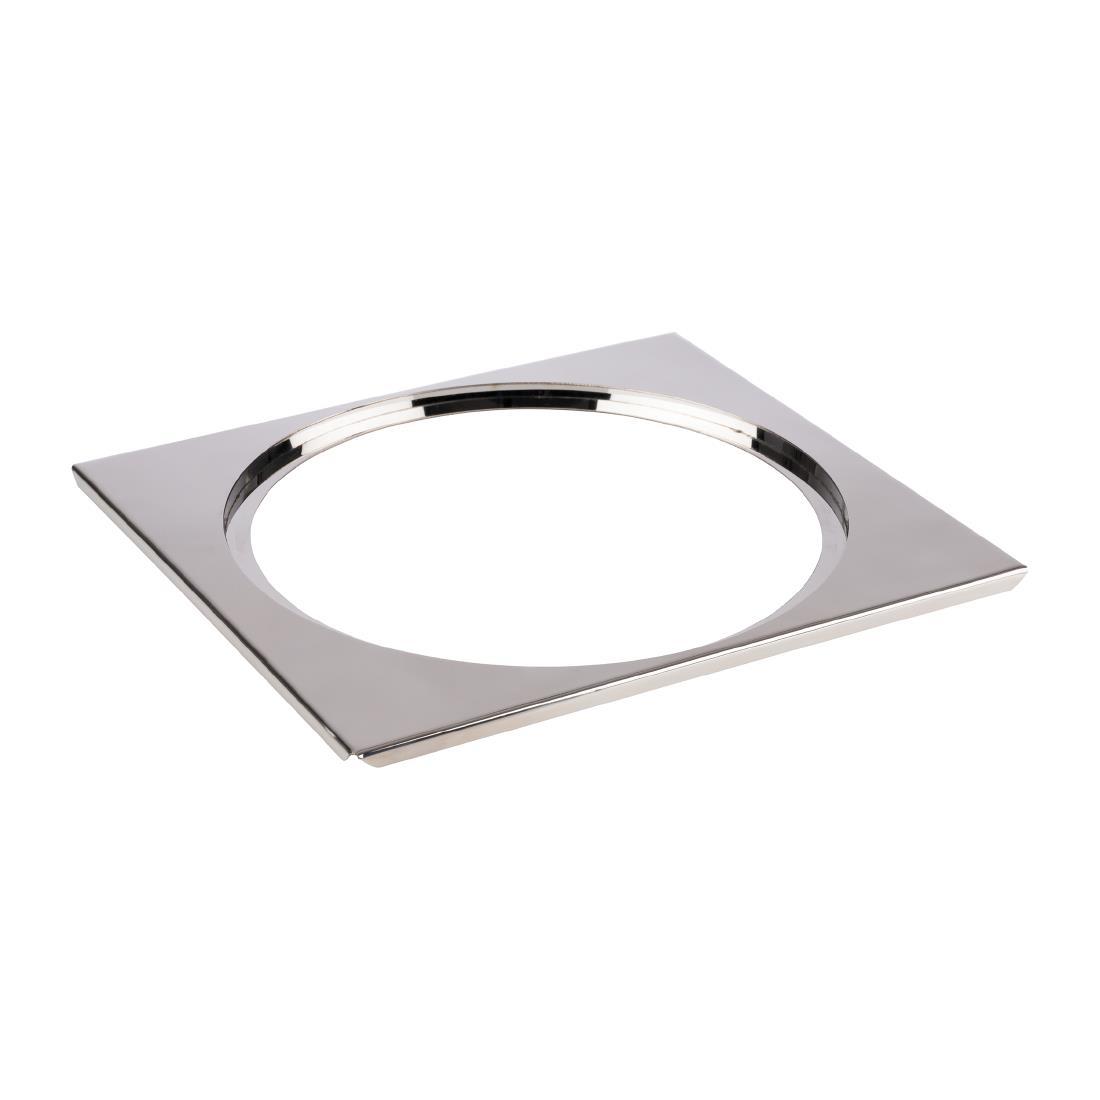 APS Stainless Steel Frame 295mm x 265mm - FT164  - 1